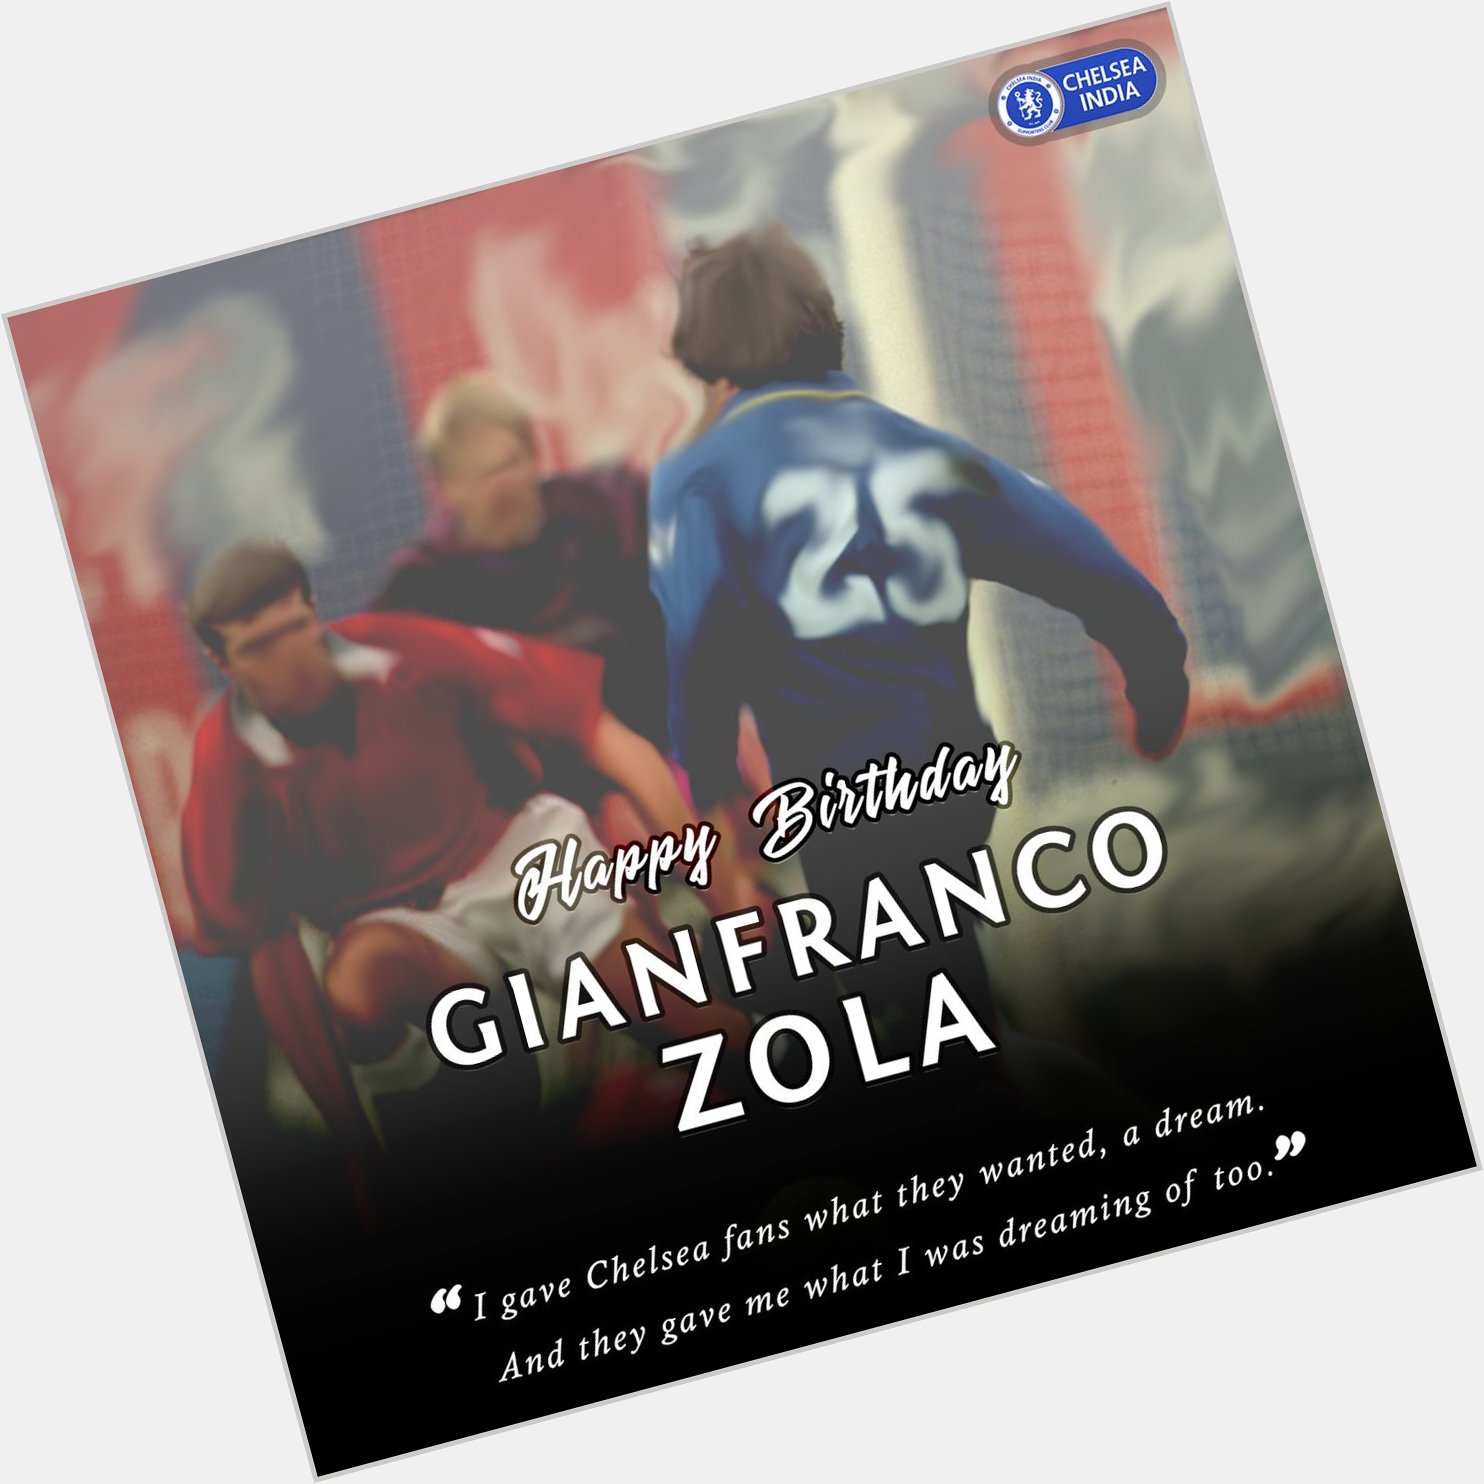 Legend Magician An incredible Player Wishing our legend Gianfranco Zola a very Happy Birthday. 